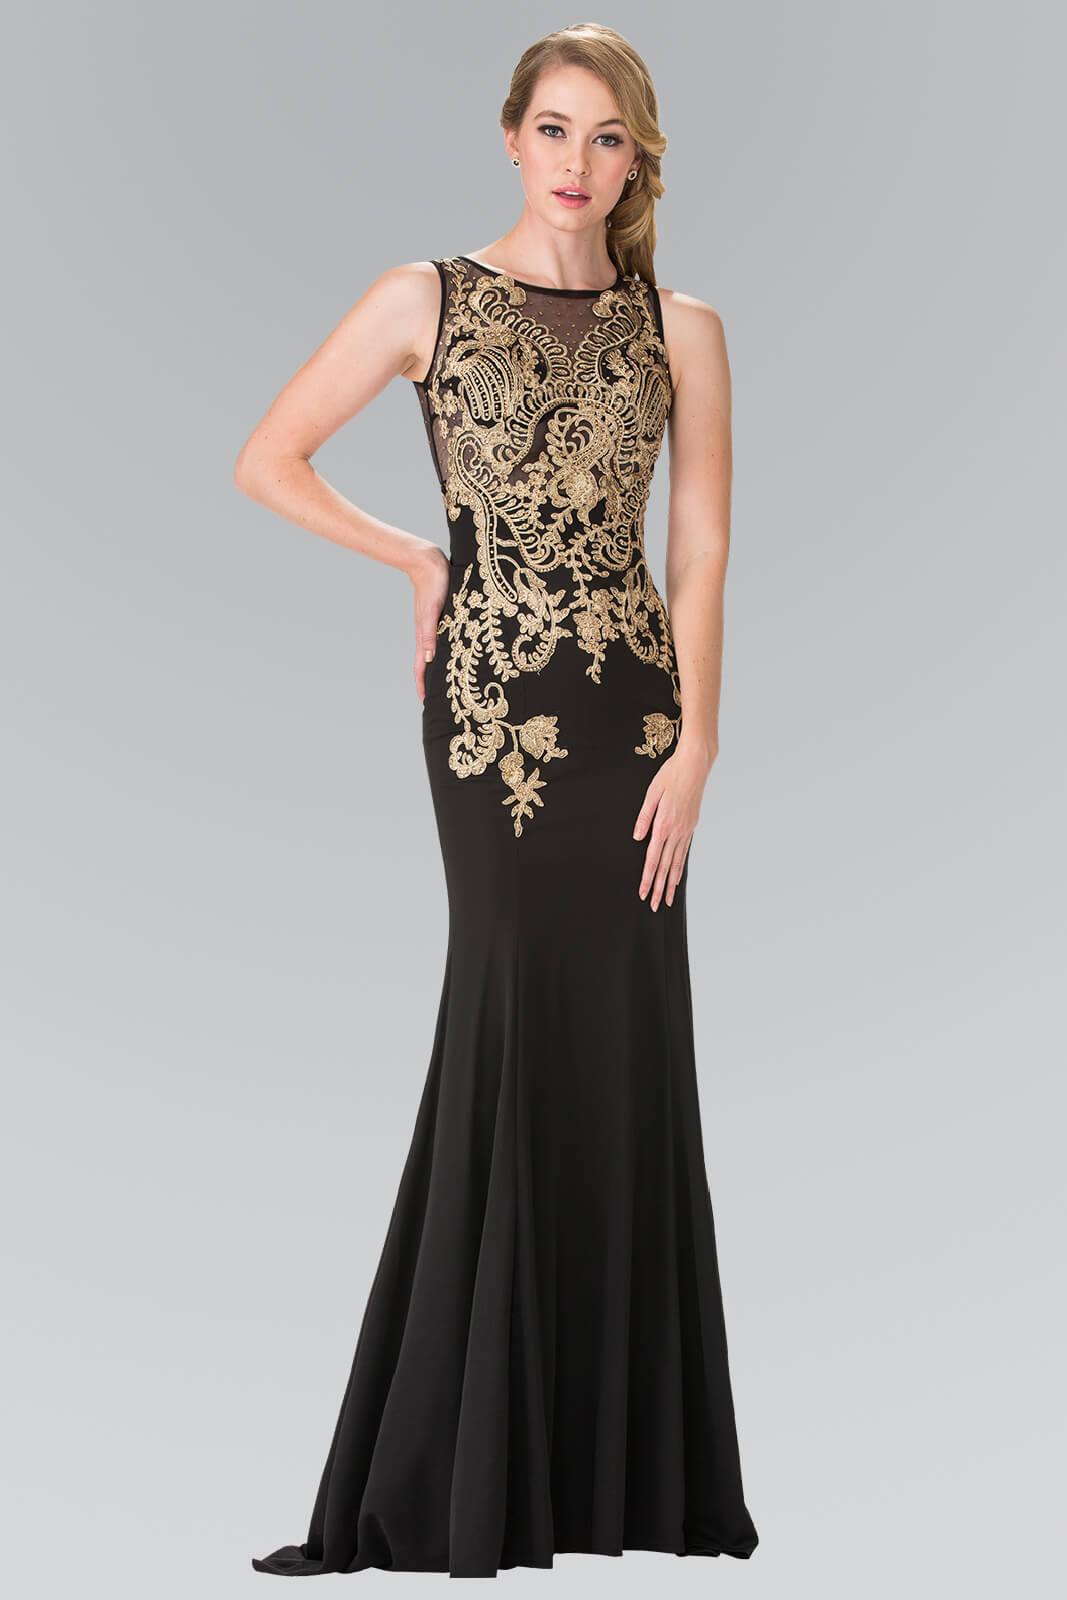 Prom Beaded Top Sheer Bodice Evening Gown - The Dress Outlet Elizabeth K